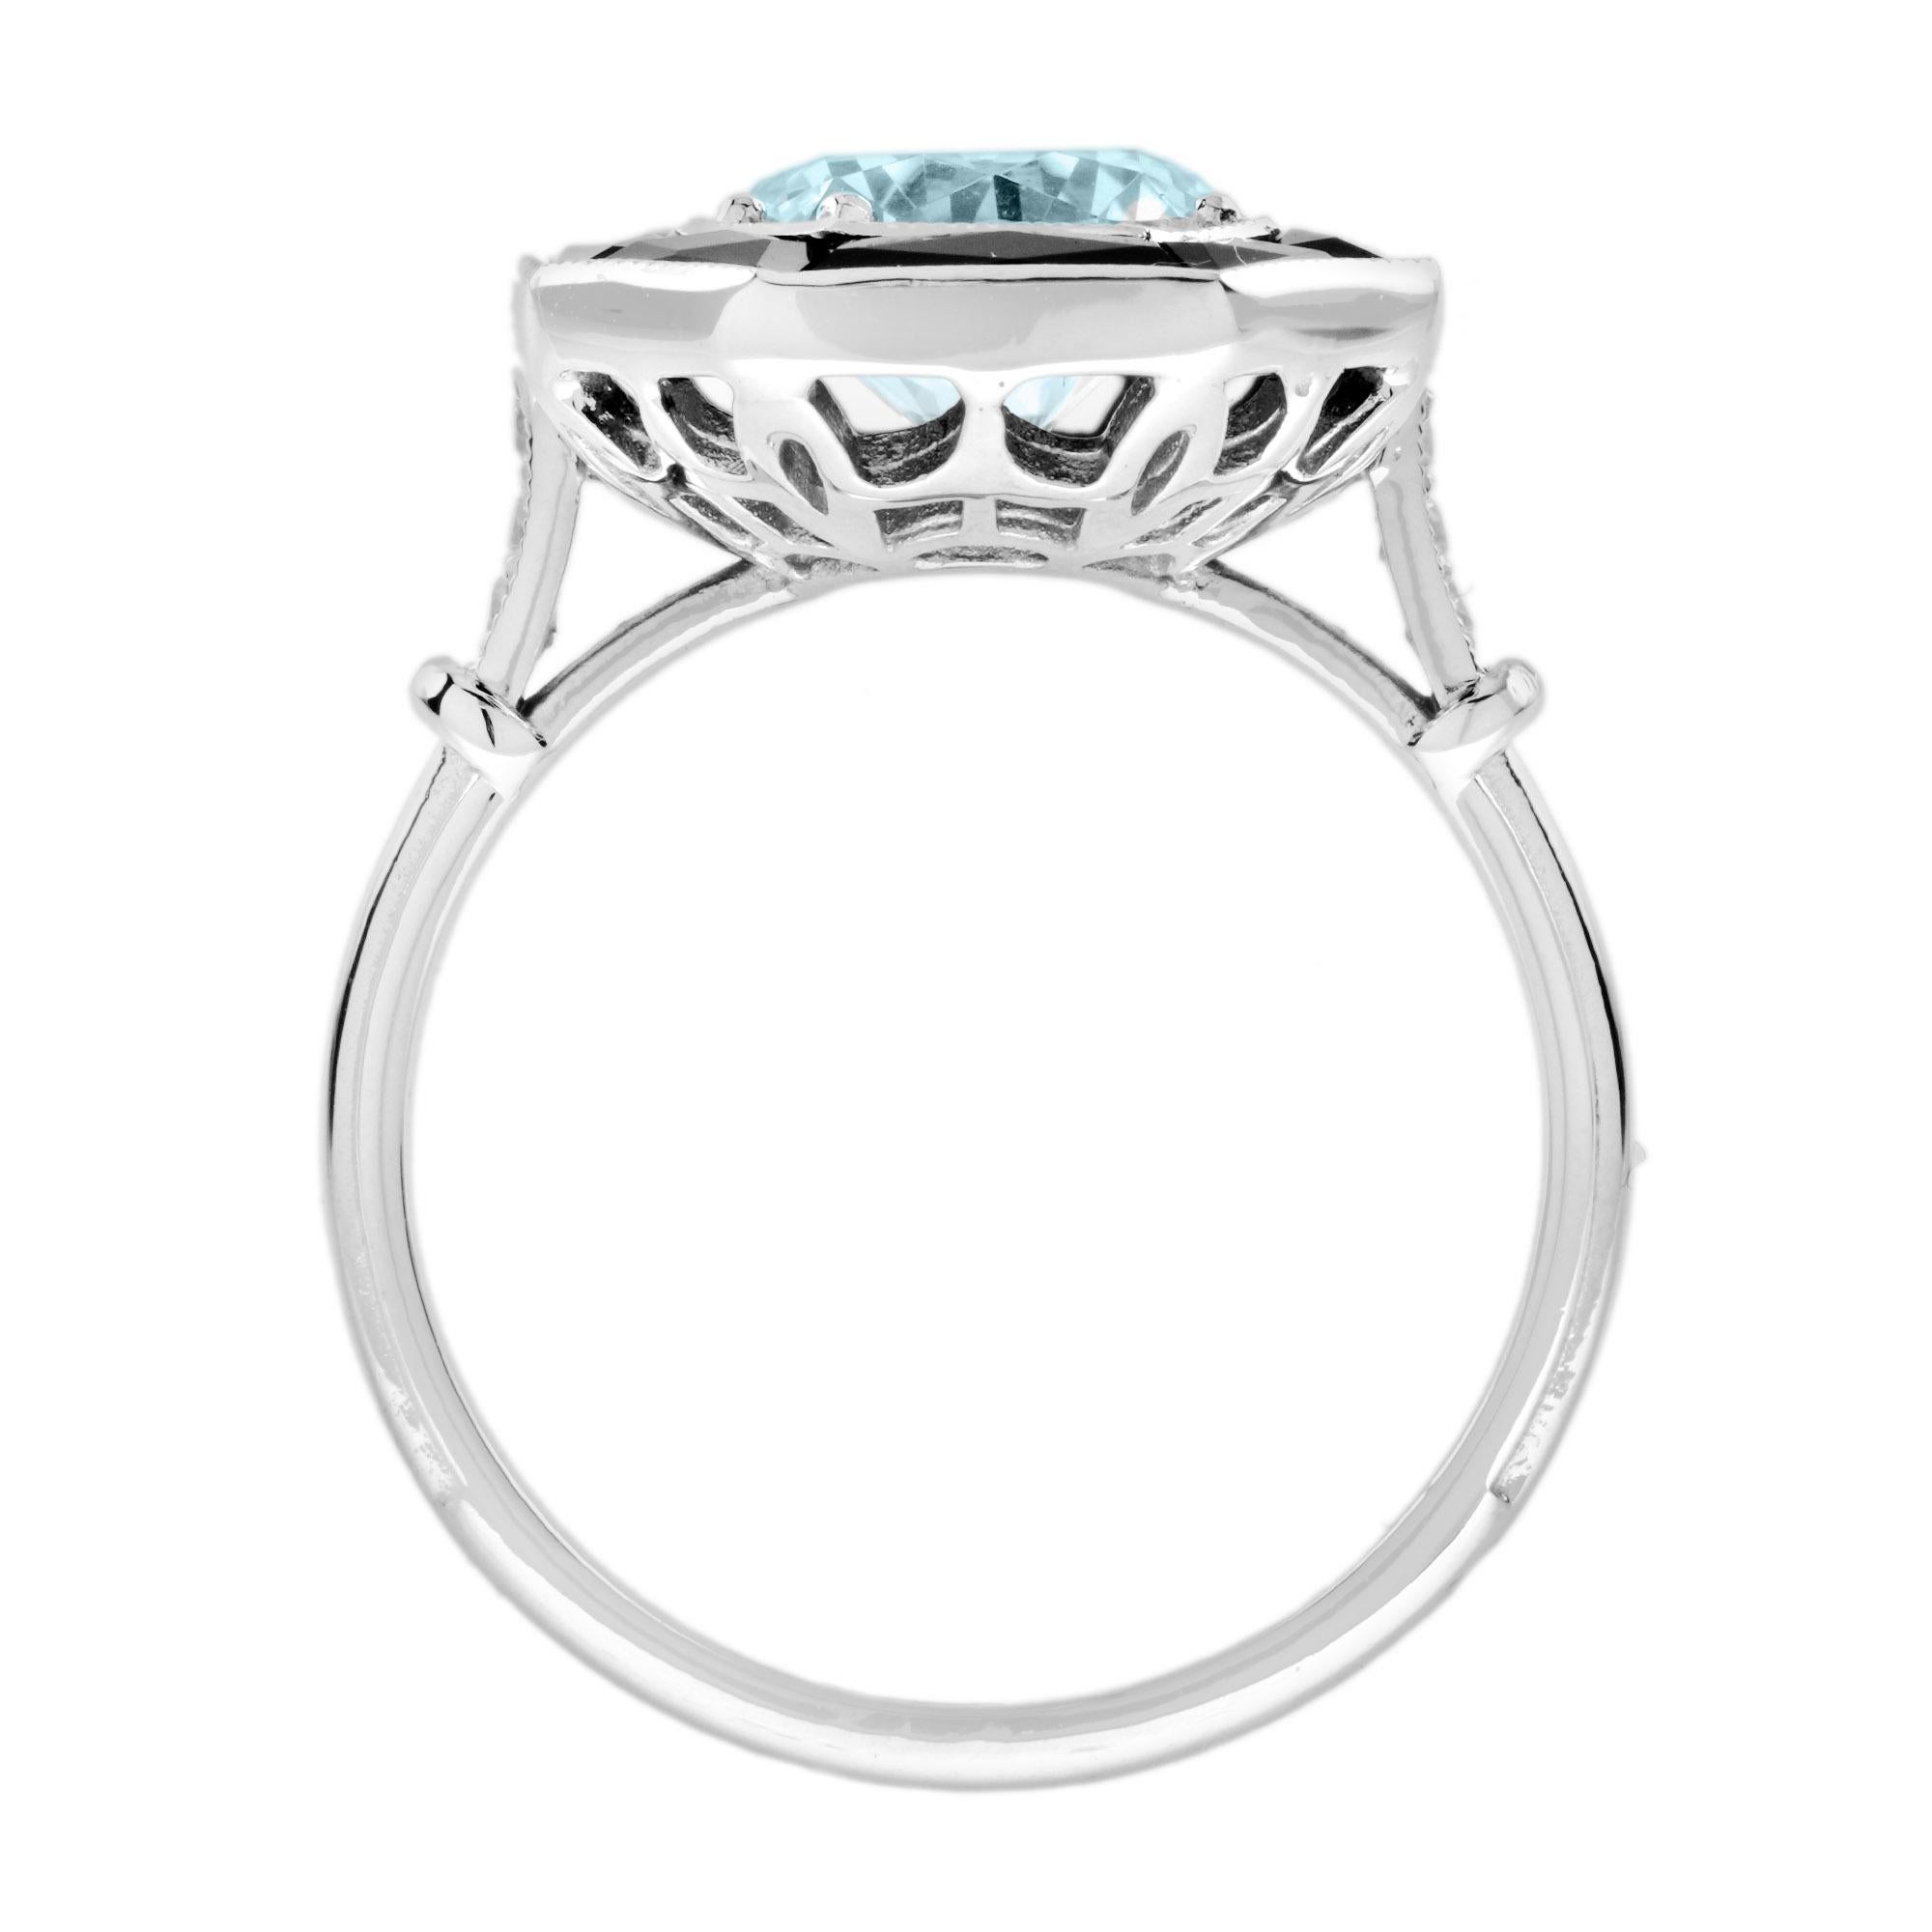 1.5 Ct. Aquamarine and Onyx Halo Art Deco Style Ring in 18K White Gold  For Sale 1